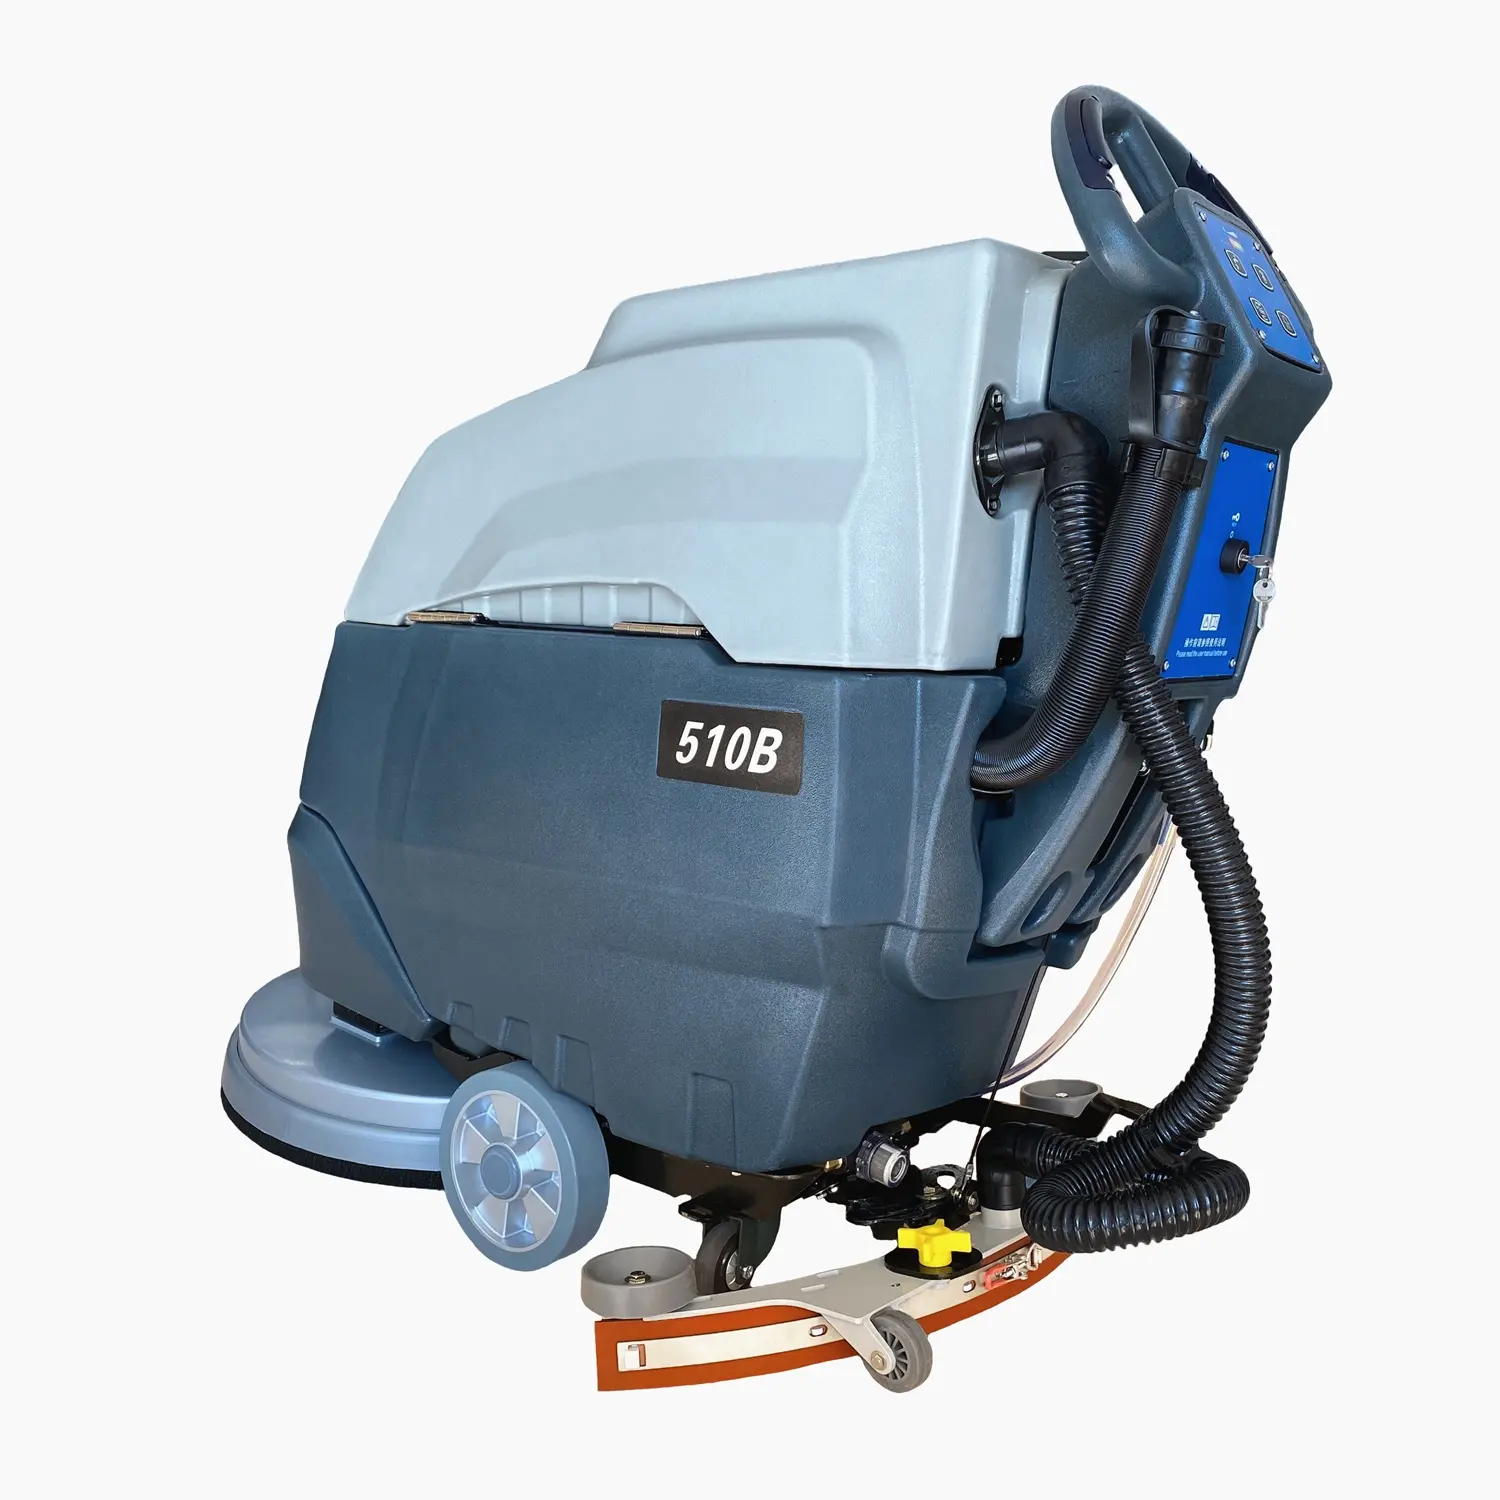 Small Floor Scrubber MLEE-510B Electric Garage Cleaning Machine Concrete Marble Tile Floor Scrubber Small